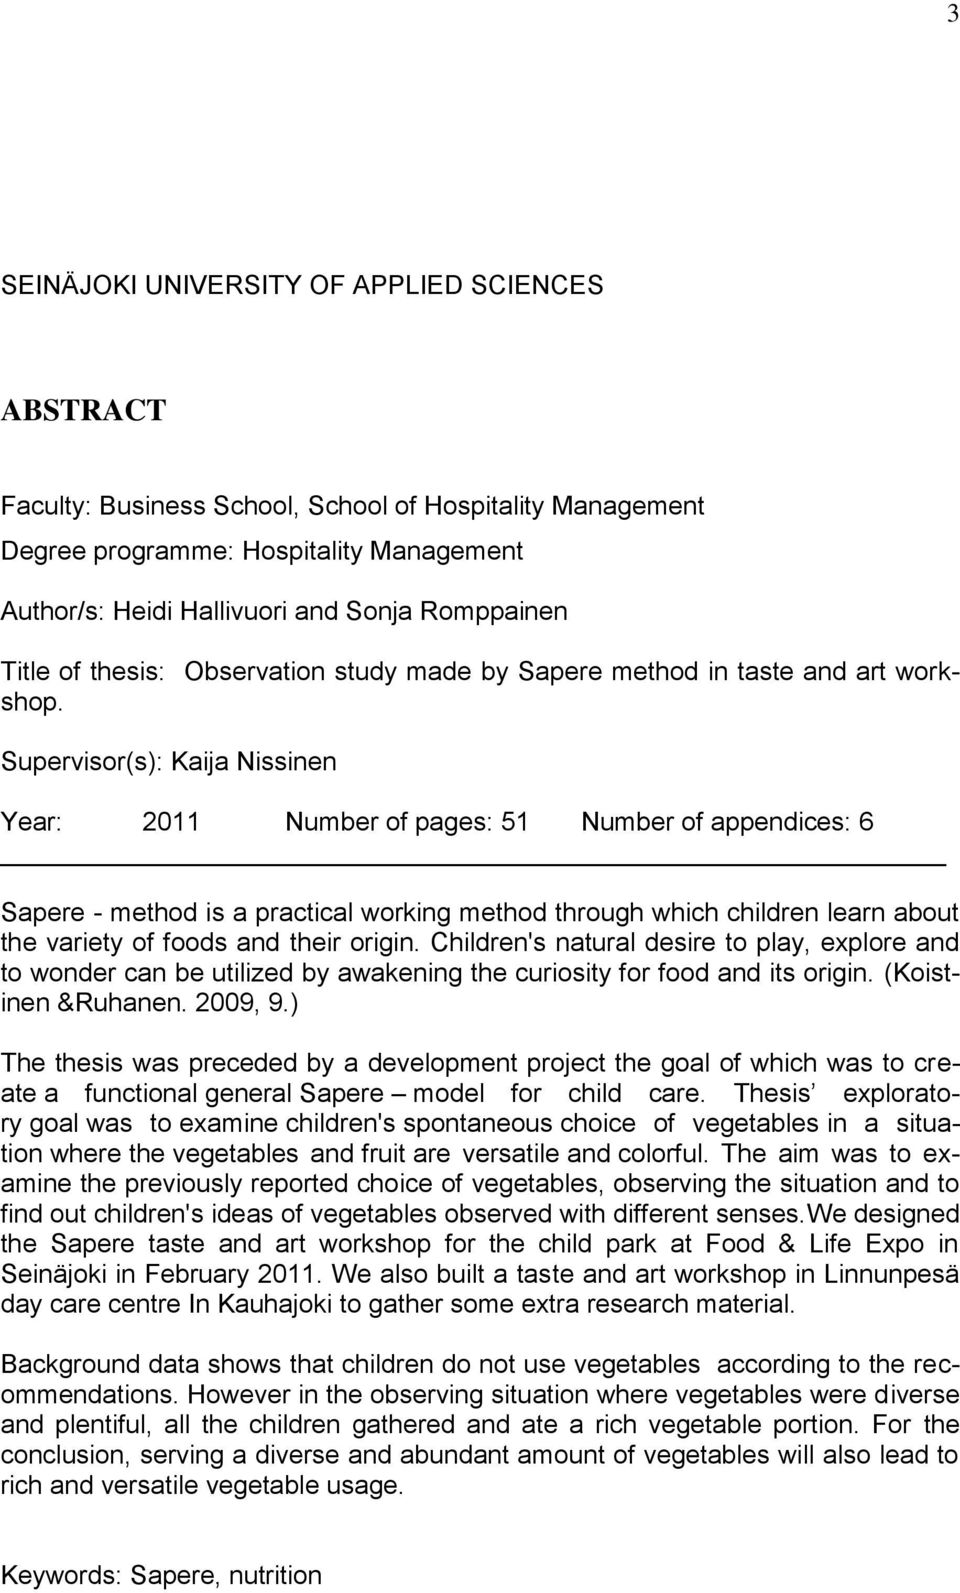 Supervisor(s): Kaija Nissinen Year: 2011 Number of pages: 51 Number of appendices: 6 Sapere - method is a practical working method through which children learn about the variety of foods and their